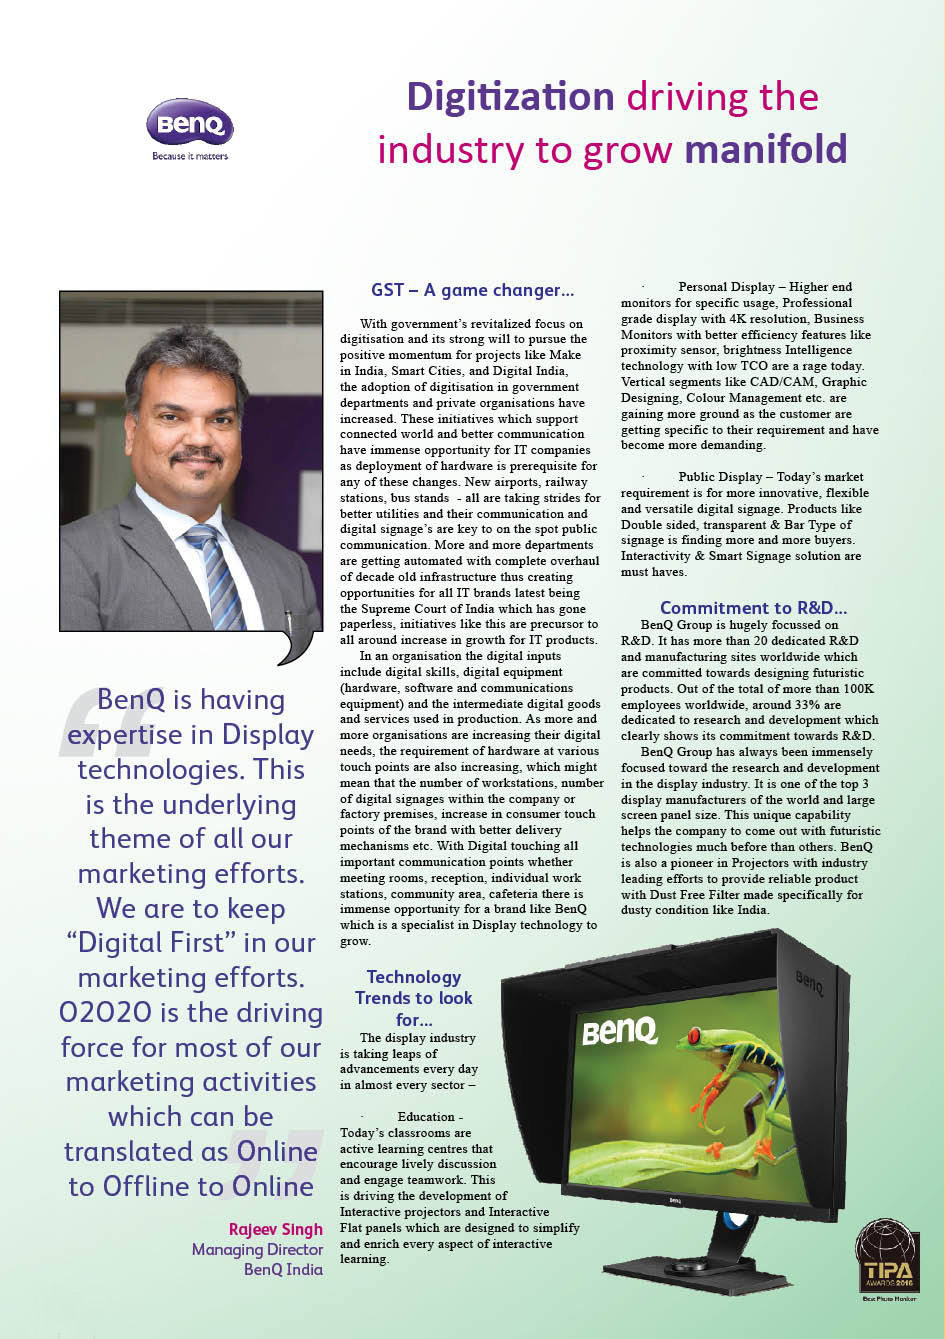 Benq: Digitization driving the industry to grow manifold